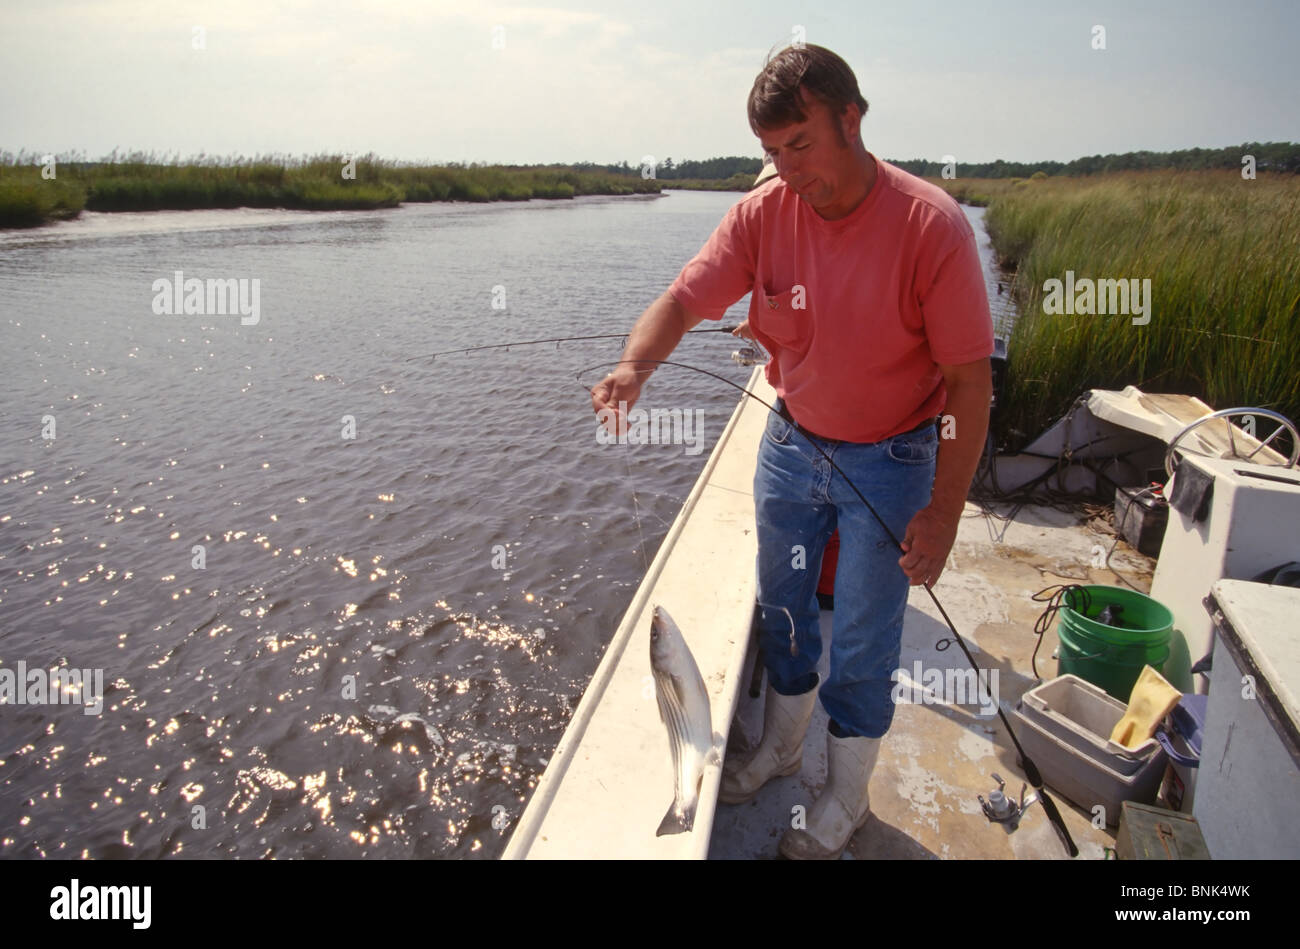 SHELLTOWN, MD, USA - 1997/09/25: A researcher for the Maryland Department of Natural Resources captures Menhaden fish for signs of the flesh eating Pfiesteria disease in the Pocomoke River along the Chesapeake Bay September 25, 1997 in Shelltown, Maryland. The outbreak caused a loss of $43 million dollars in fishing revenue and is believed to be caused by the runoff of chicken manure from farms in the area. (Photo by Richard Ellis) Stock Photo